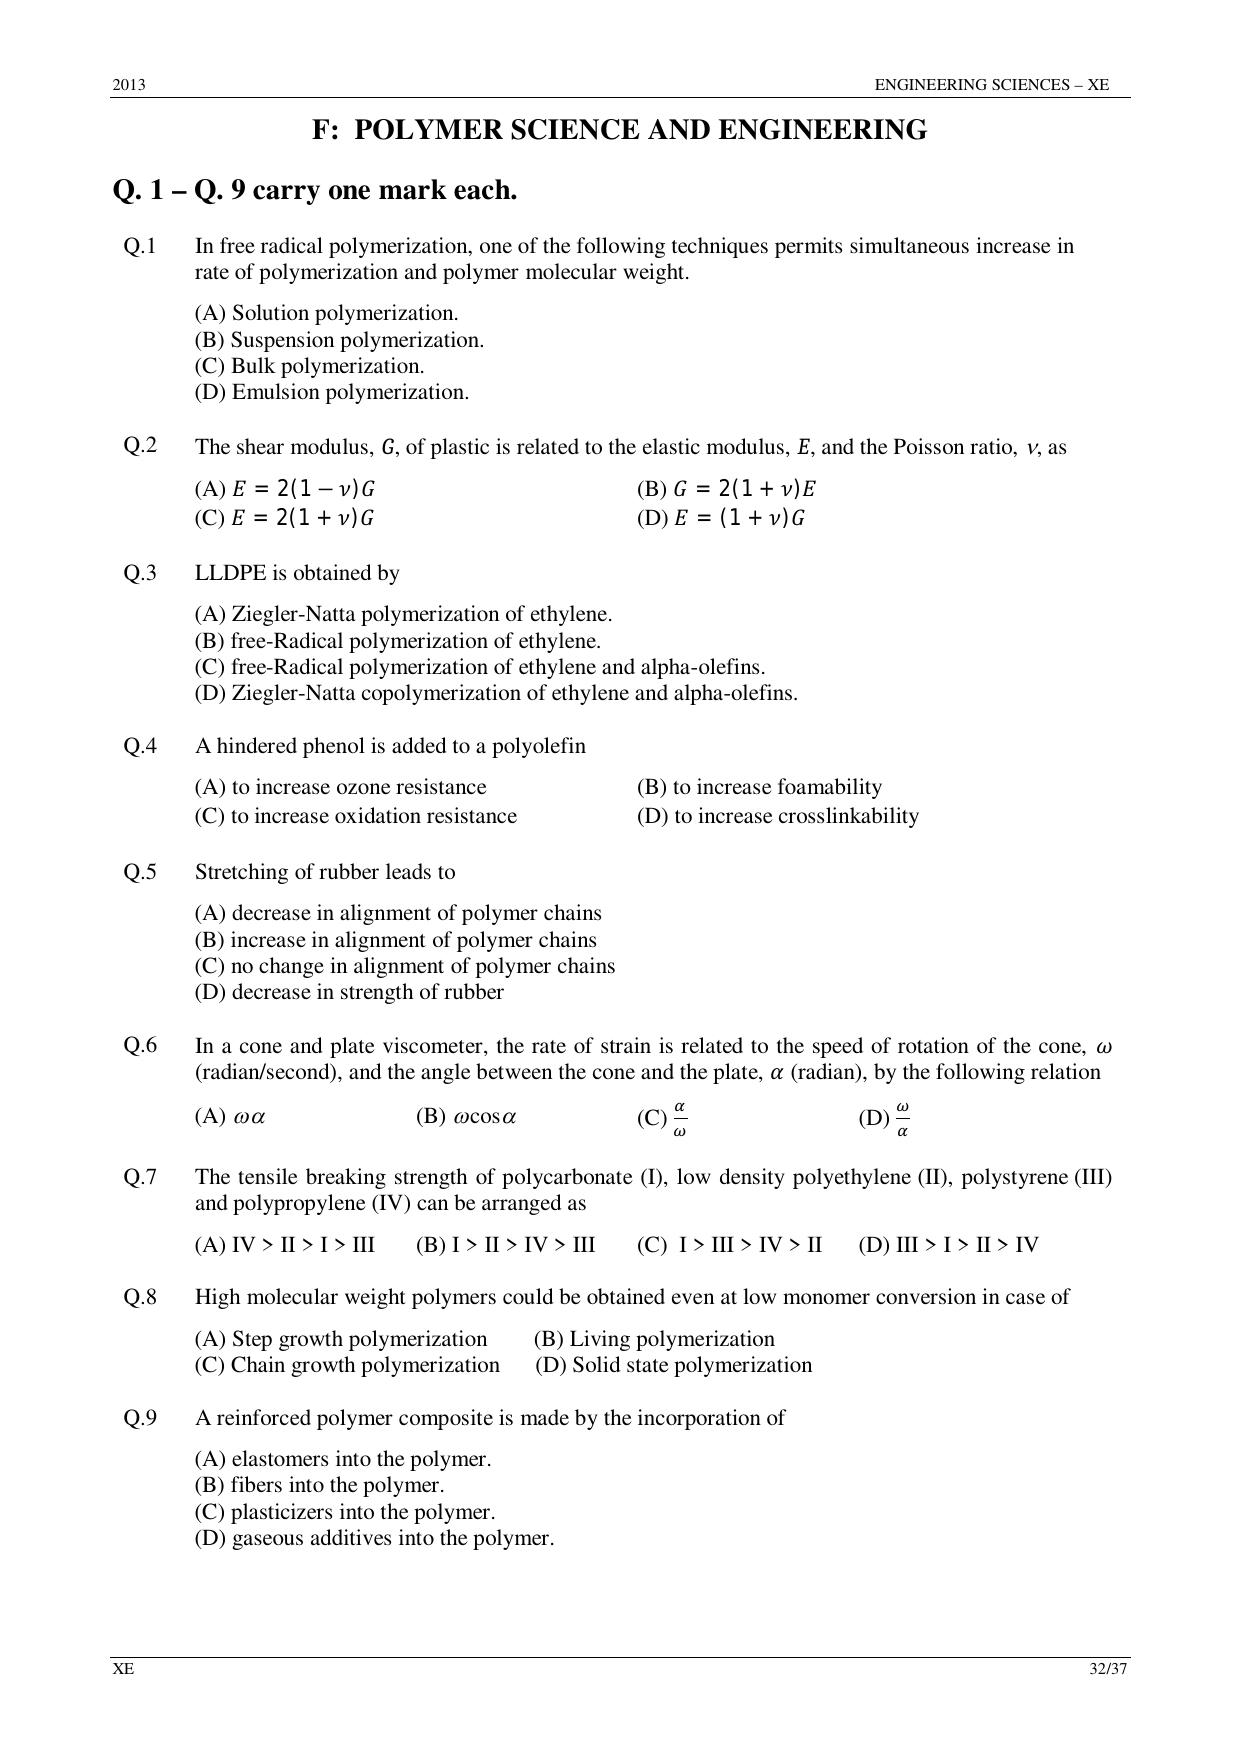 GATE 2013 Engineering Sciences (XE) Question Paper with Answer Key - Page 32